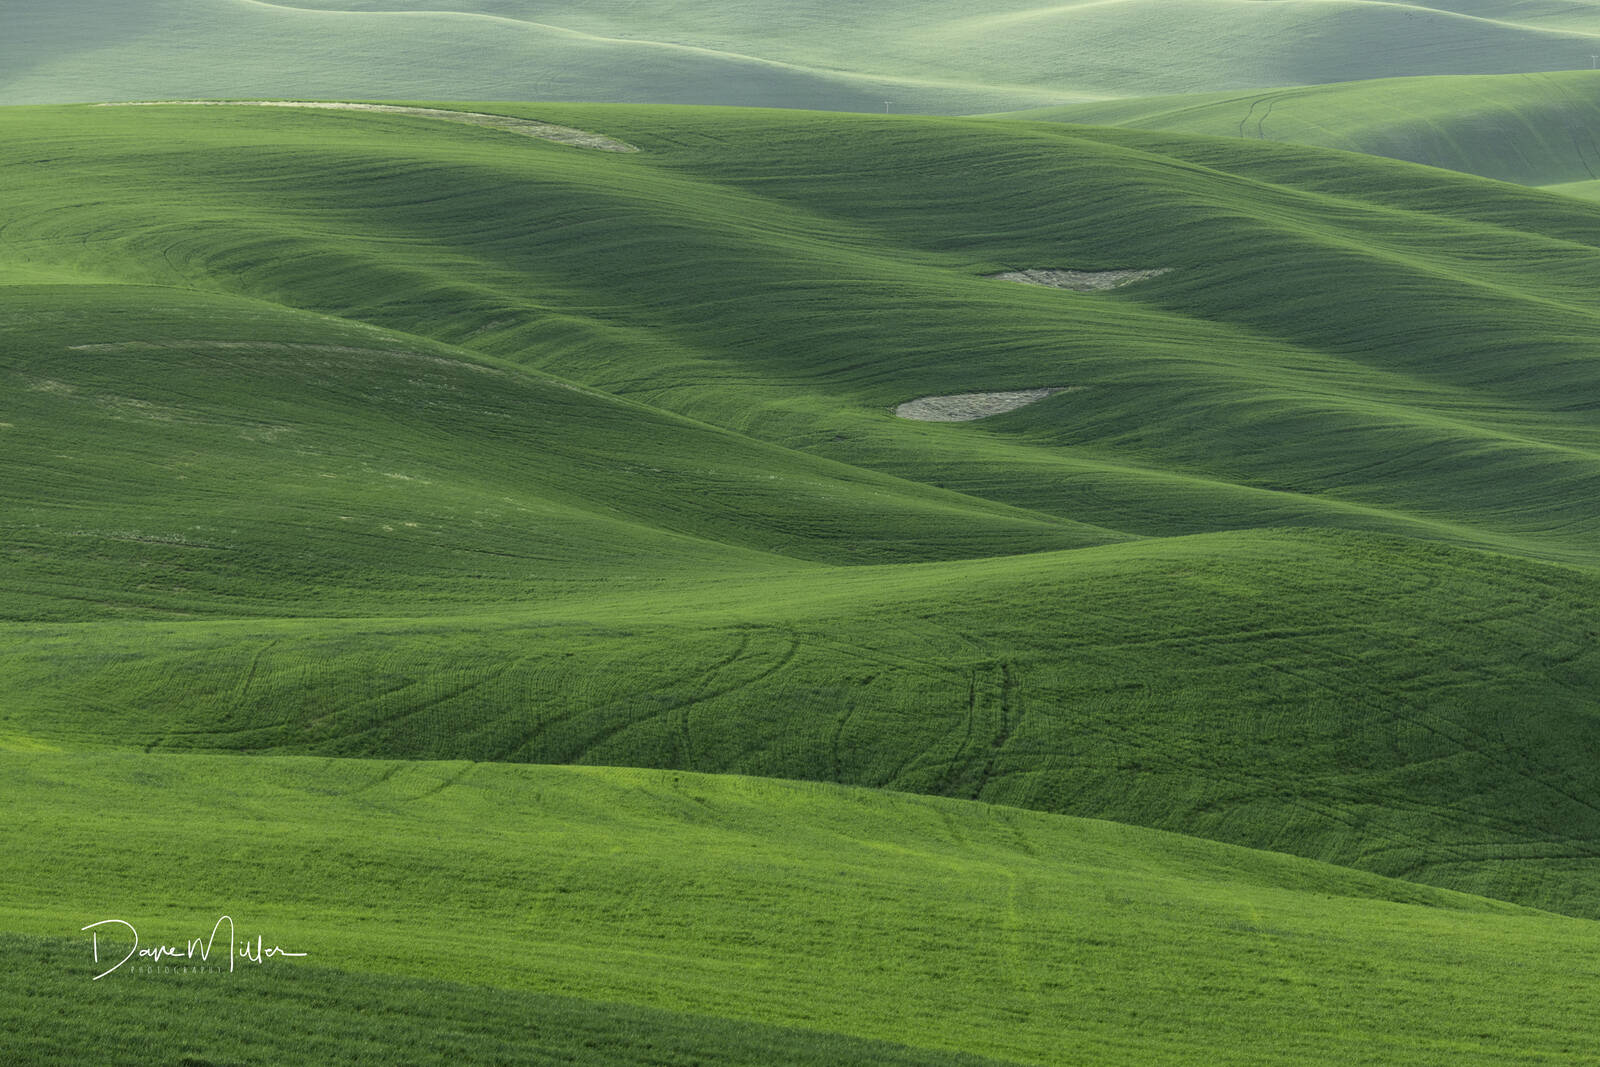 Image of Steptoe Butte by Dave Miller